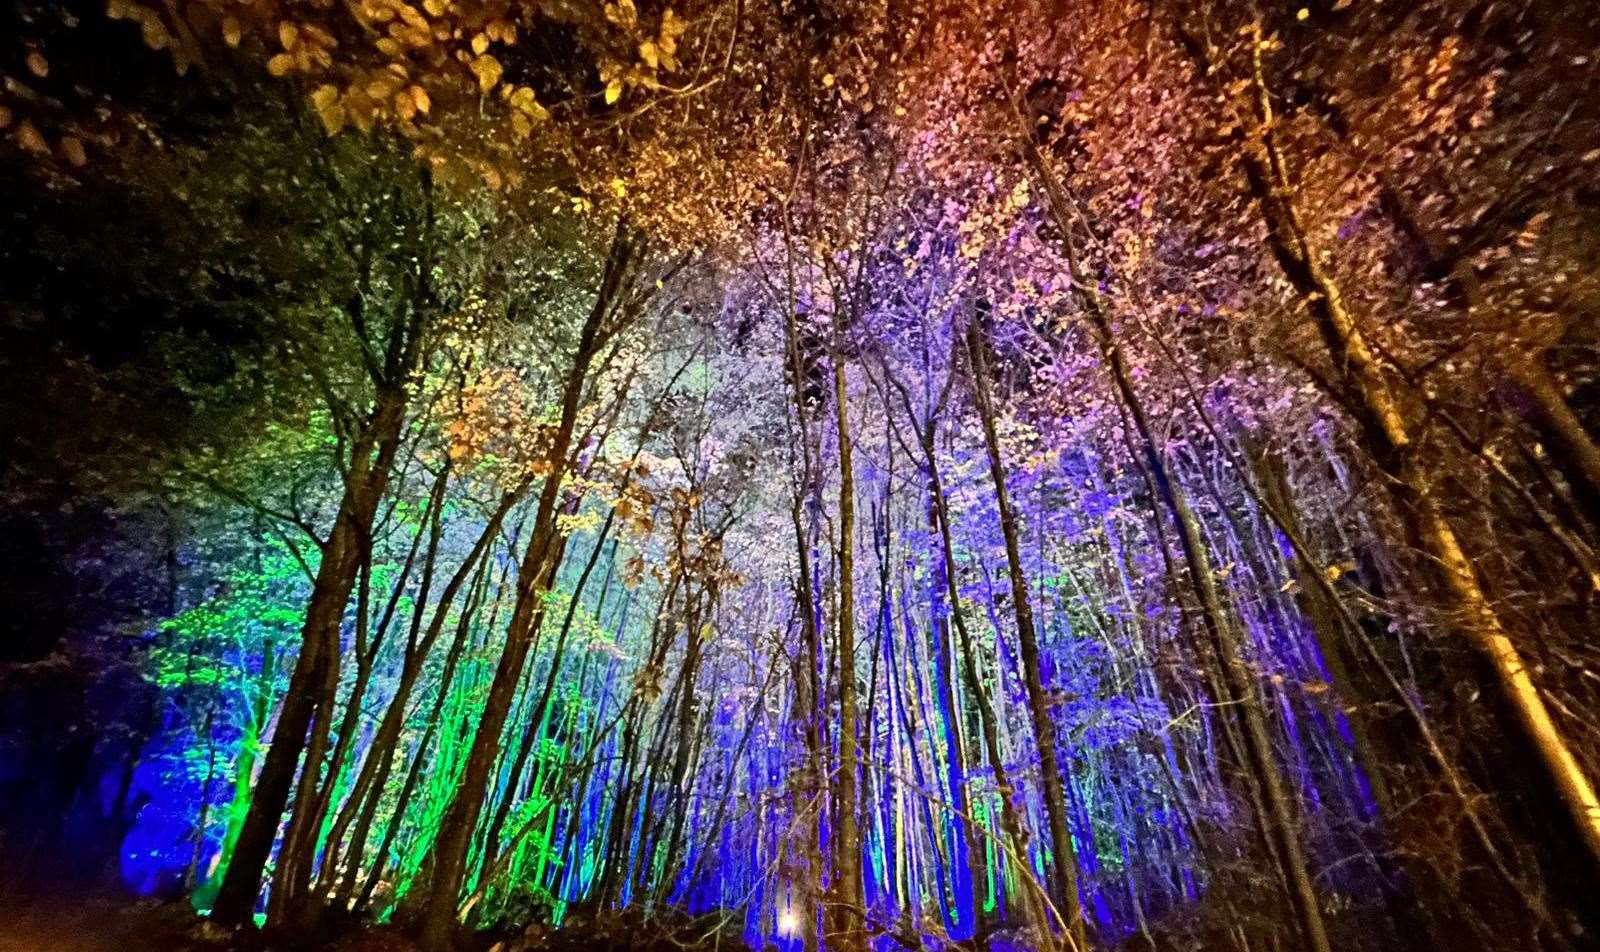 The colourful light trail is one of the most-visited events in Kent’s festive calendar